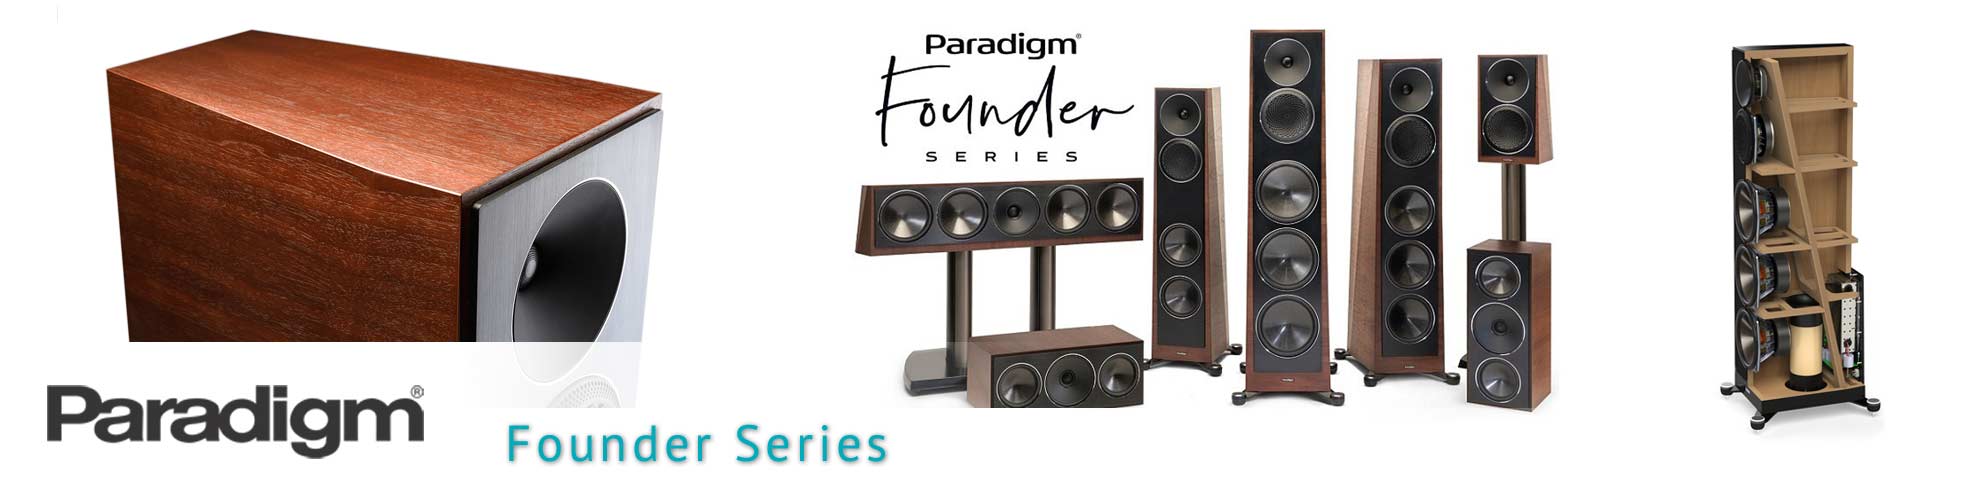 Paradigm Founder Series speakers for home stereo in Orlando, FL